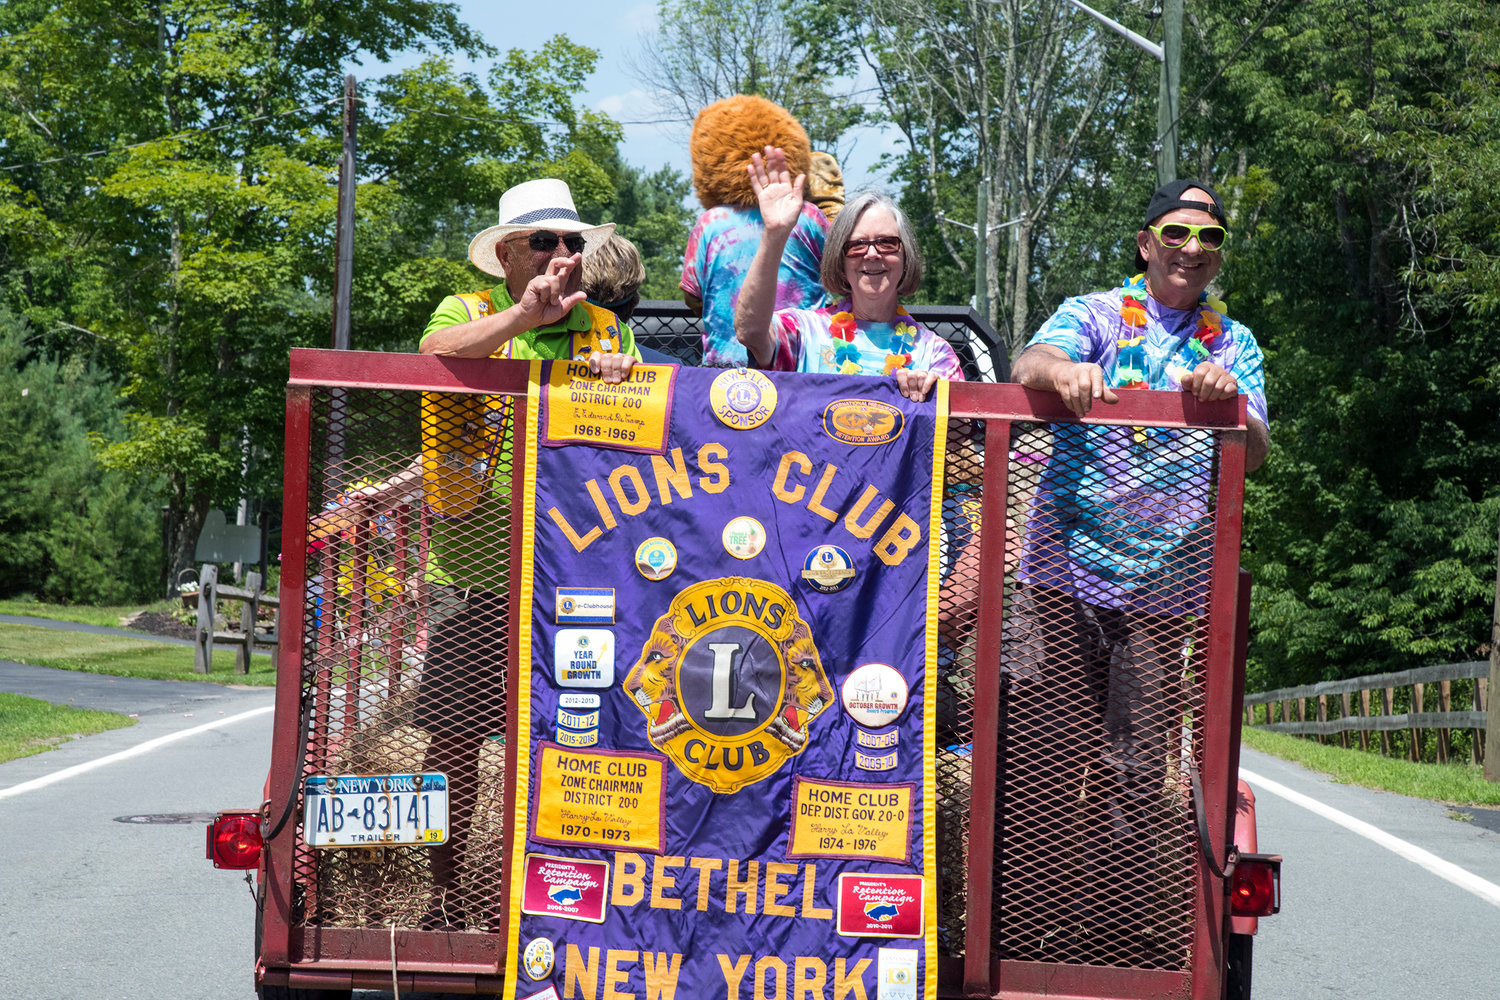 Bethel Lions, (L-R) John Bogaert, Marie Fox, and Mike Fox serve up some good cheer to the crowd.